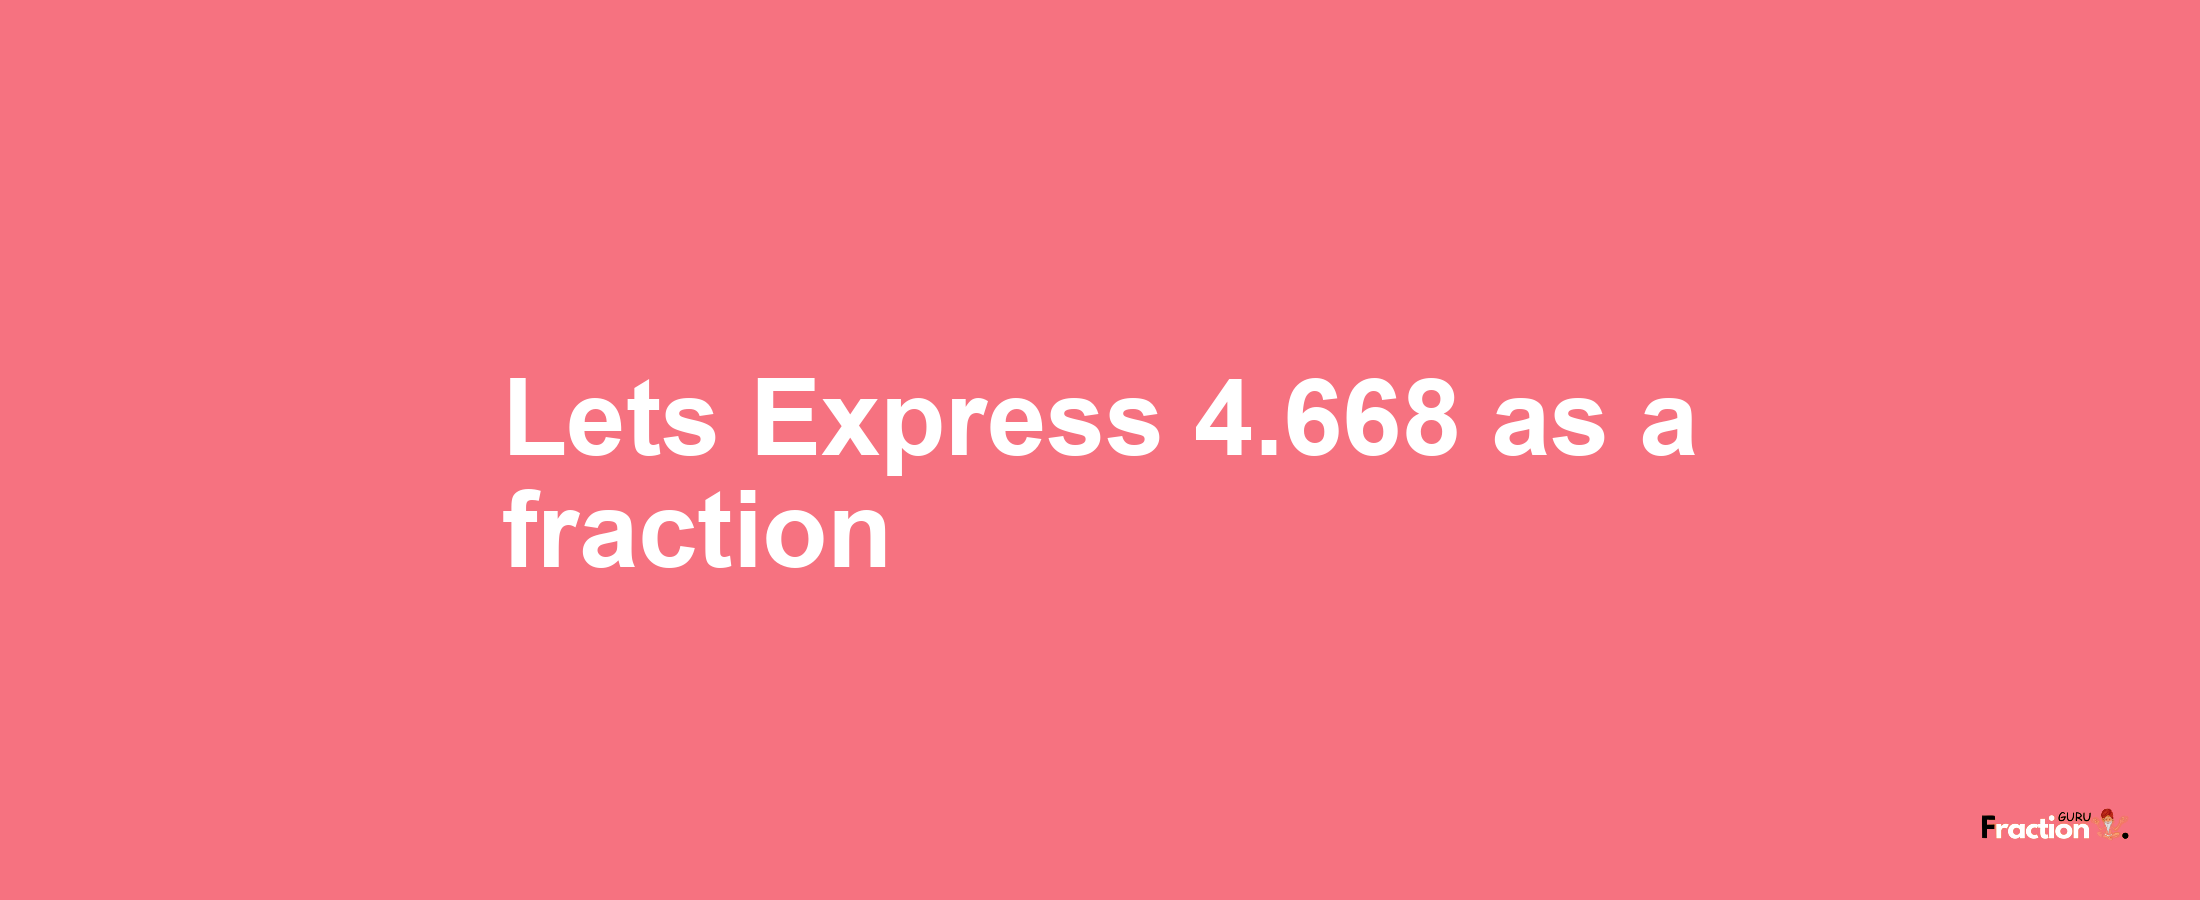 Lets Express 4.668 as afraction